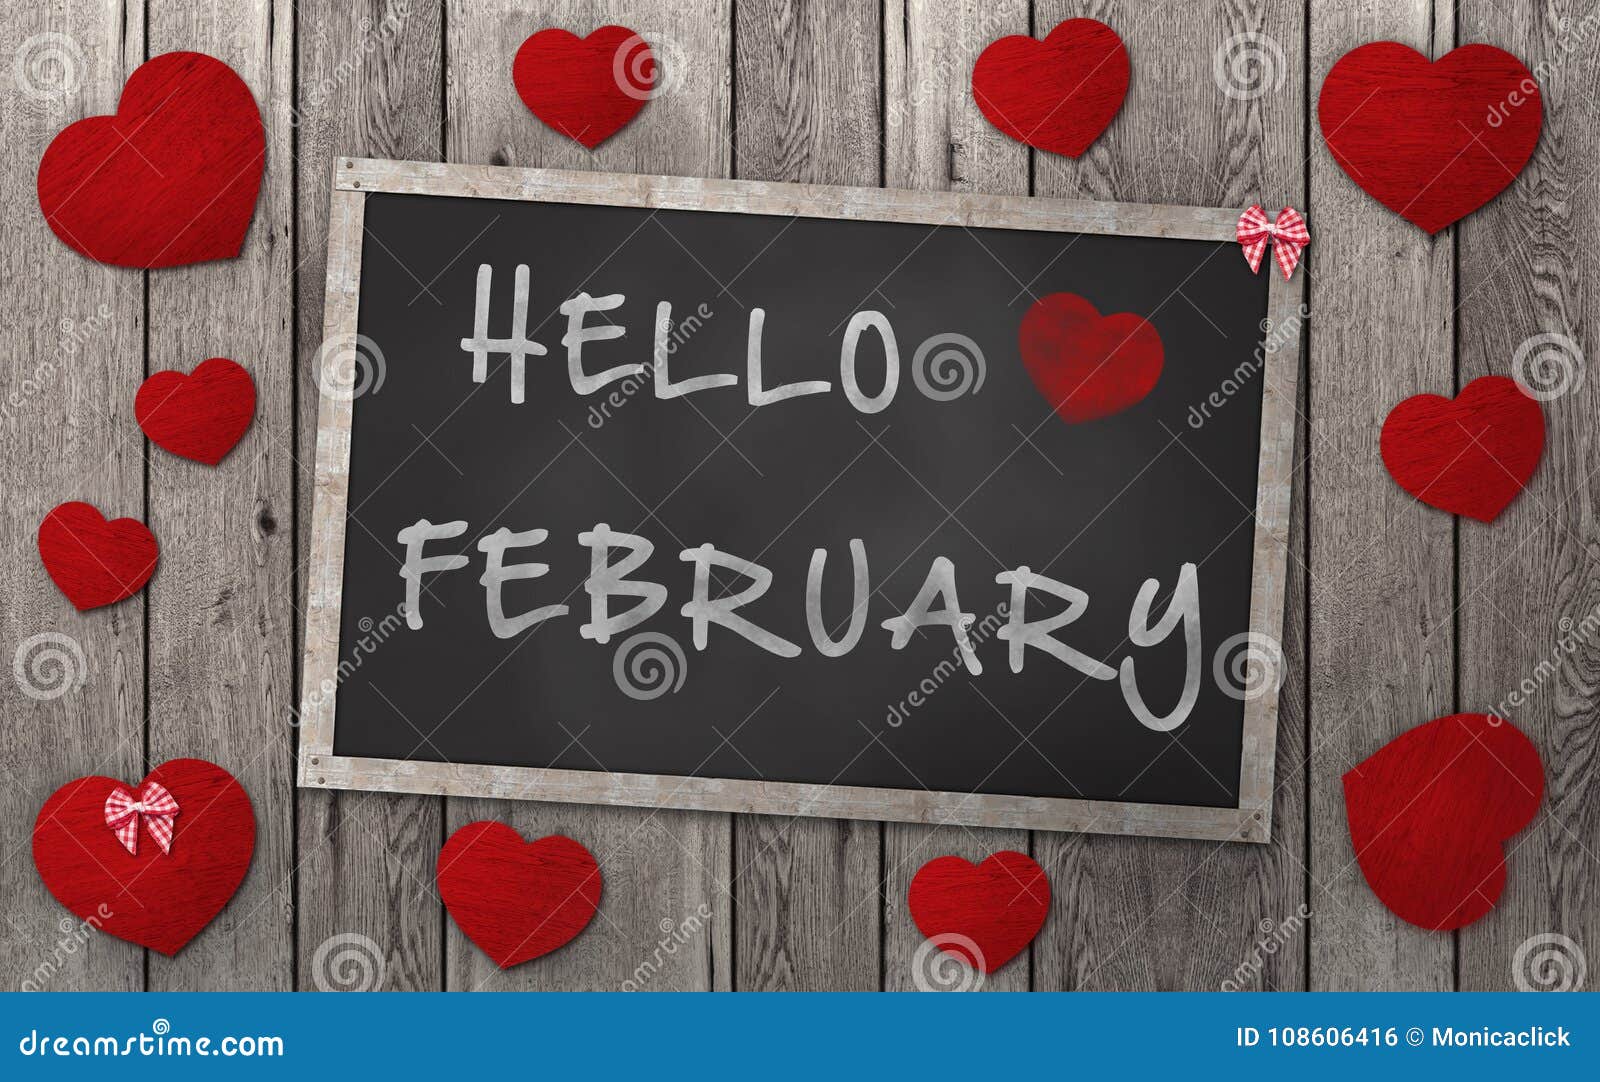 blackboard with words hello february, surrounded by red hearts on weathered wooden background